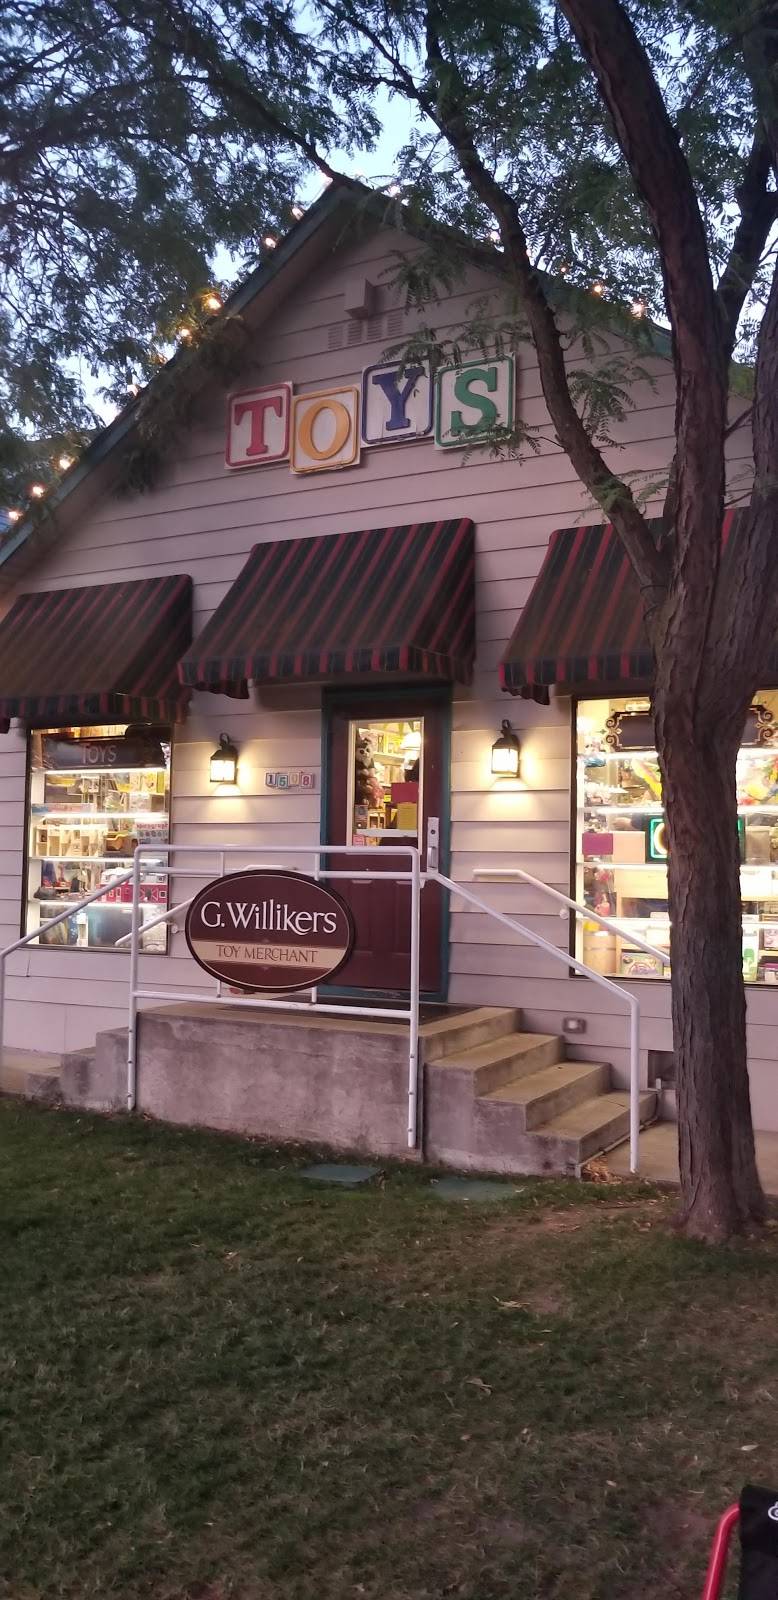 G. Willikers Toy Merchant | 1508 N 13th St, Boise, ID 83702, USA | Phone: (208) 344-1999